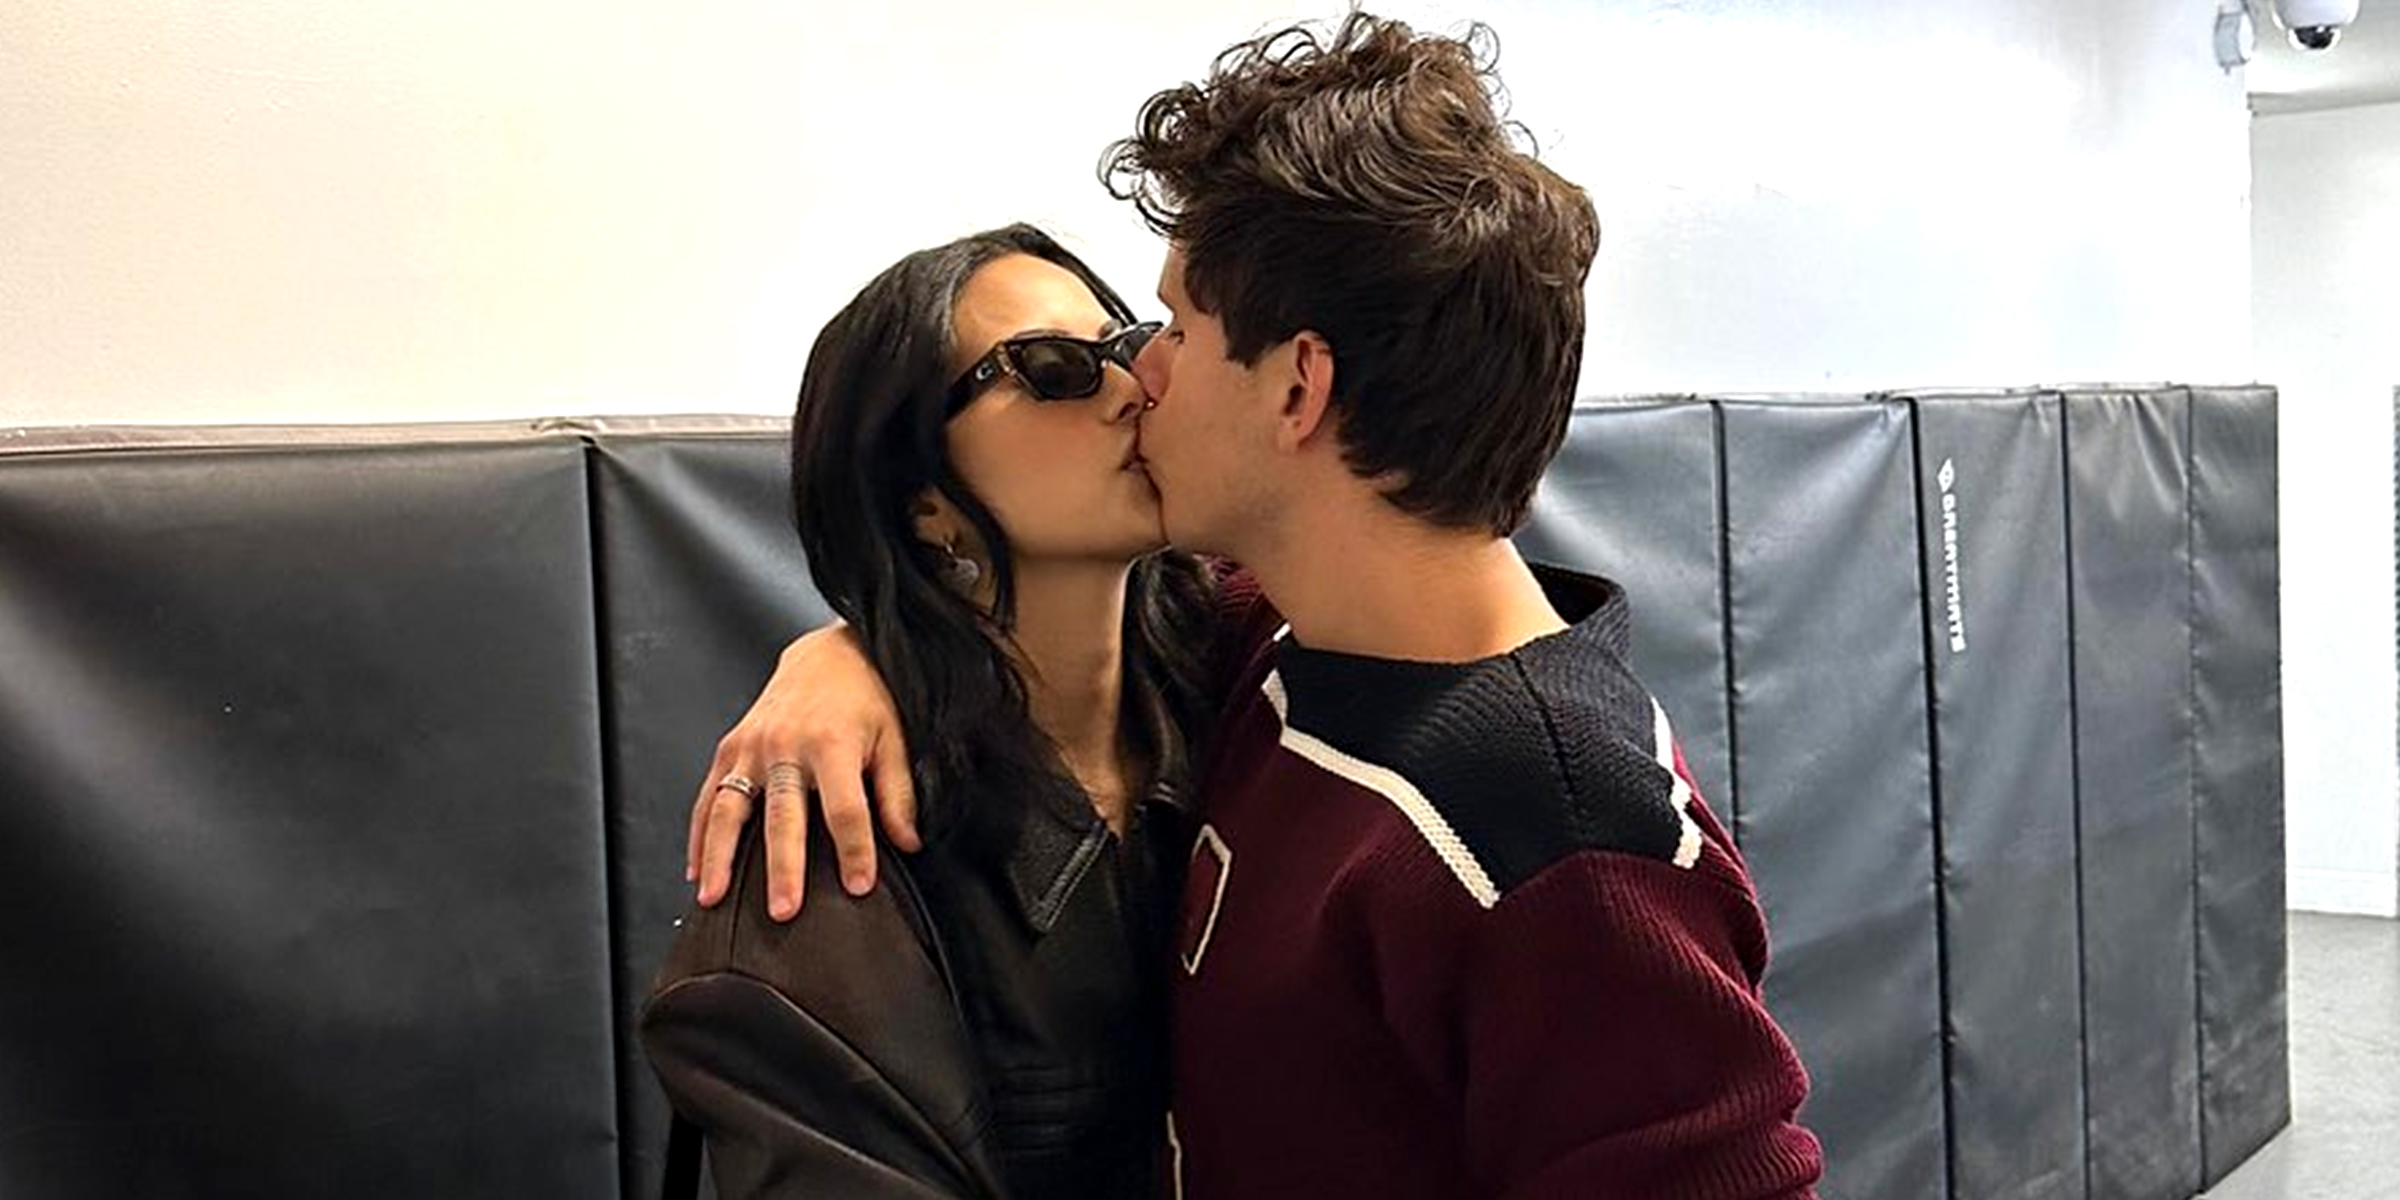 Camila Mendes and Rudy Mancuso | Source: Instagram/camimendes